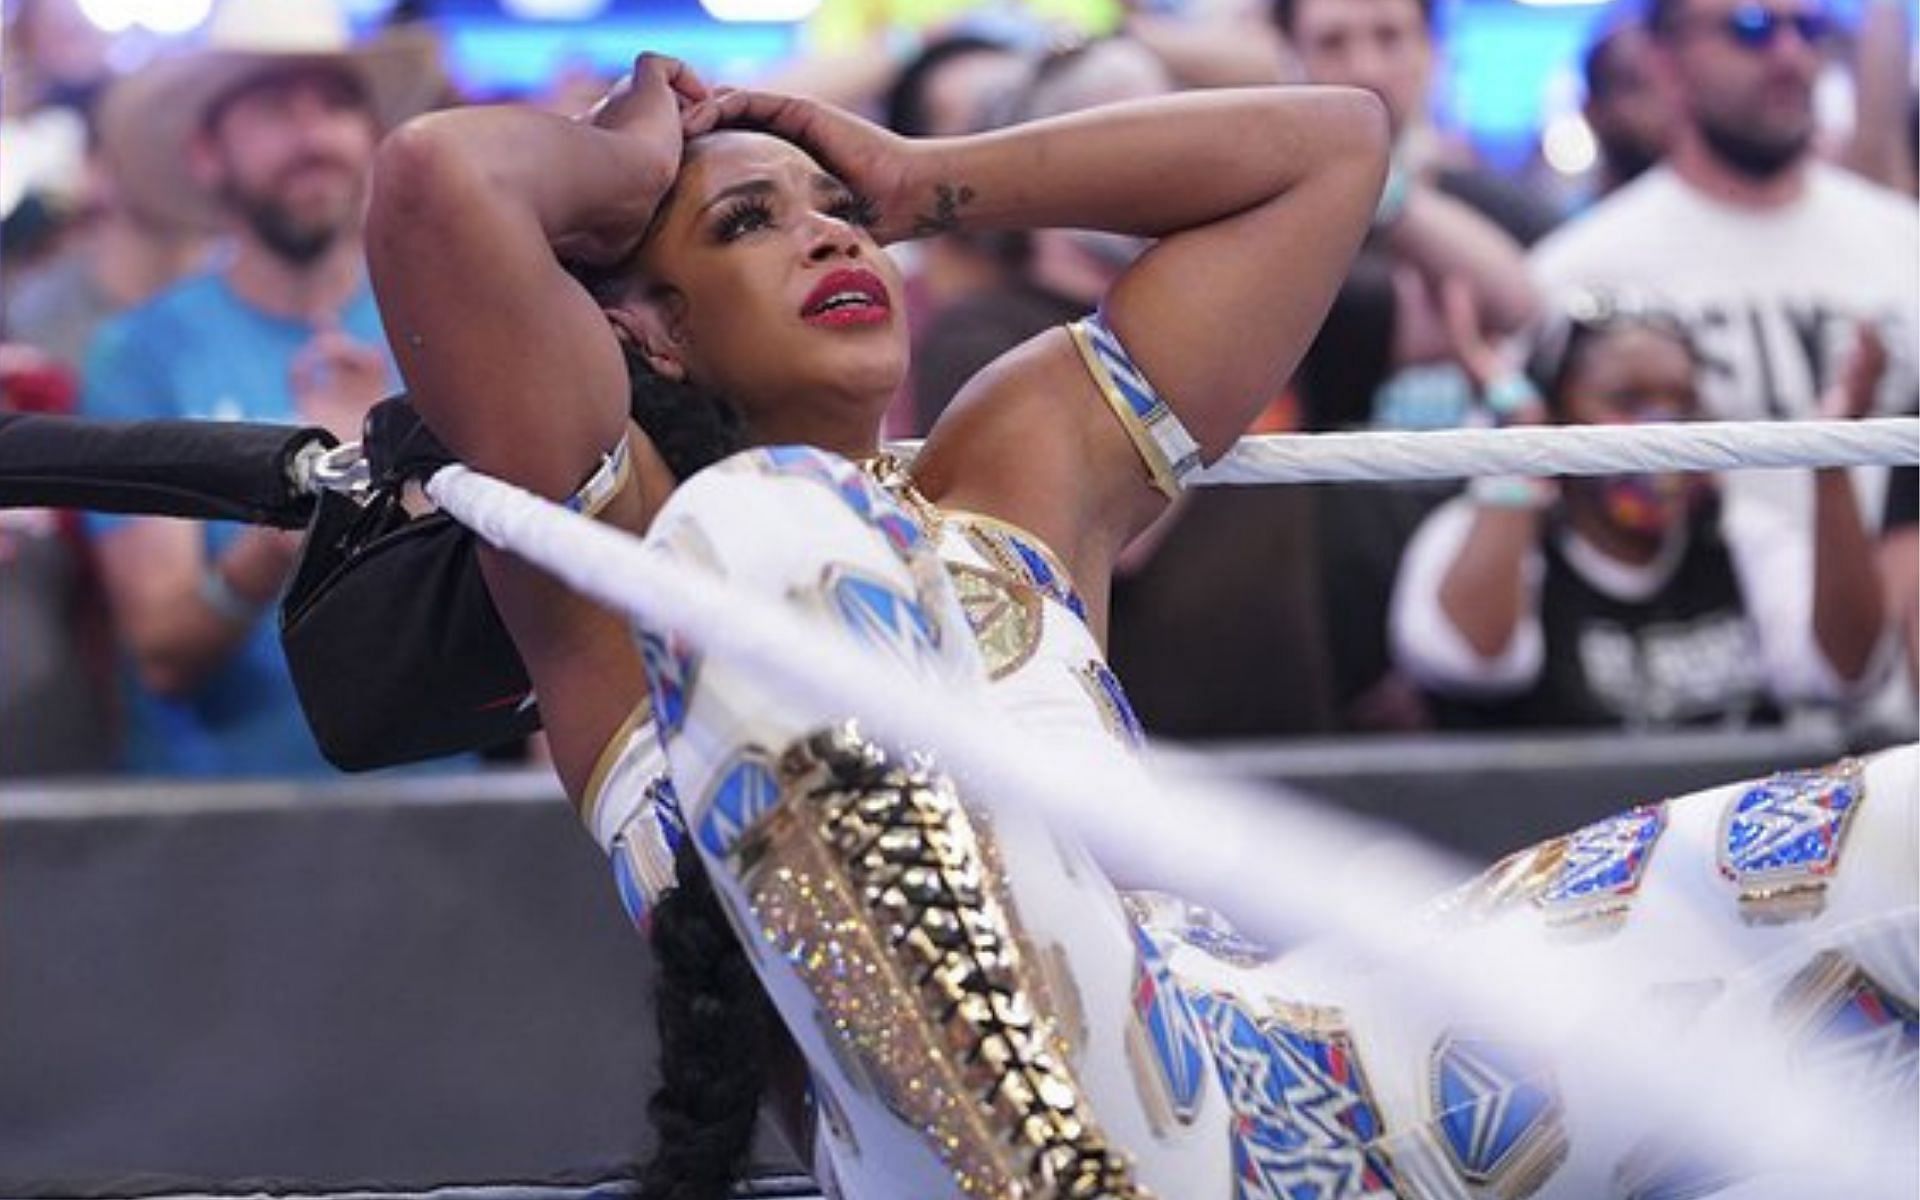 Bianca Belair had a shocking fan incident recently